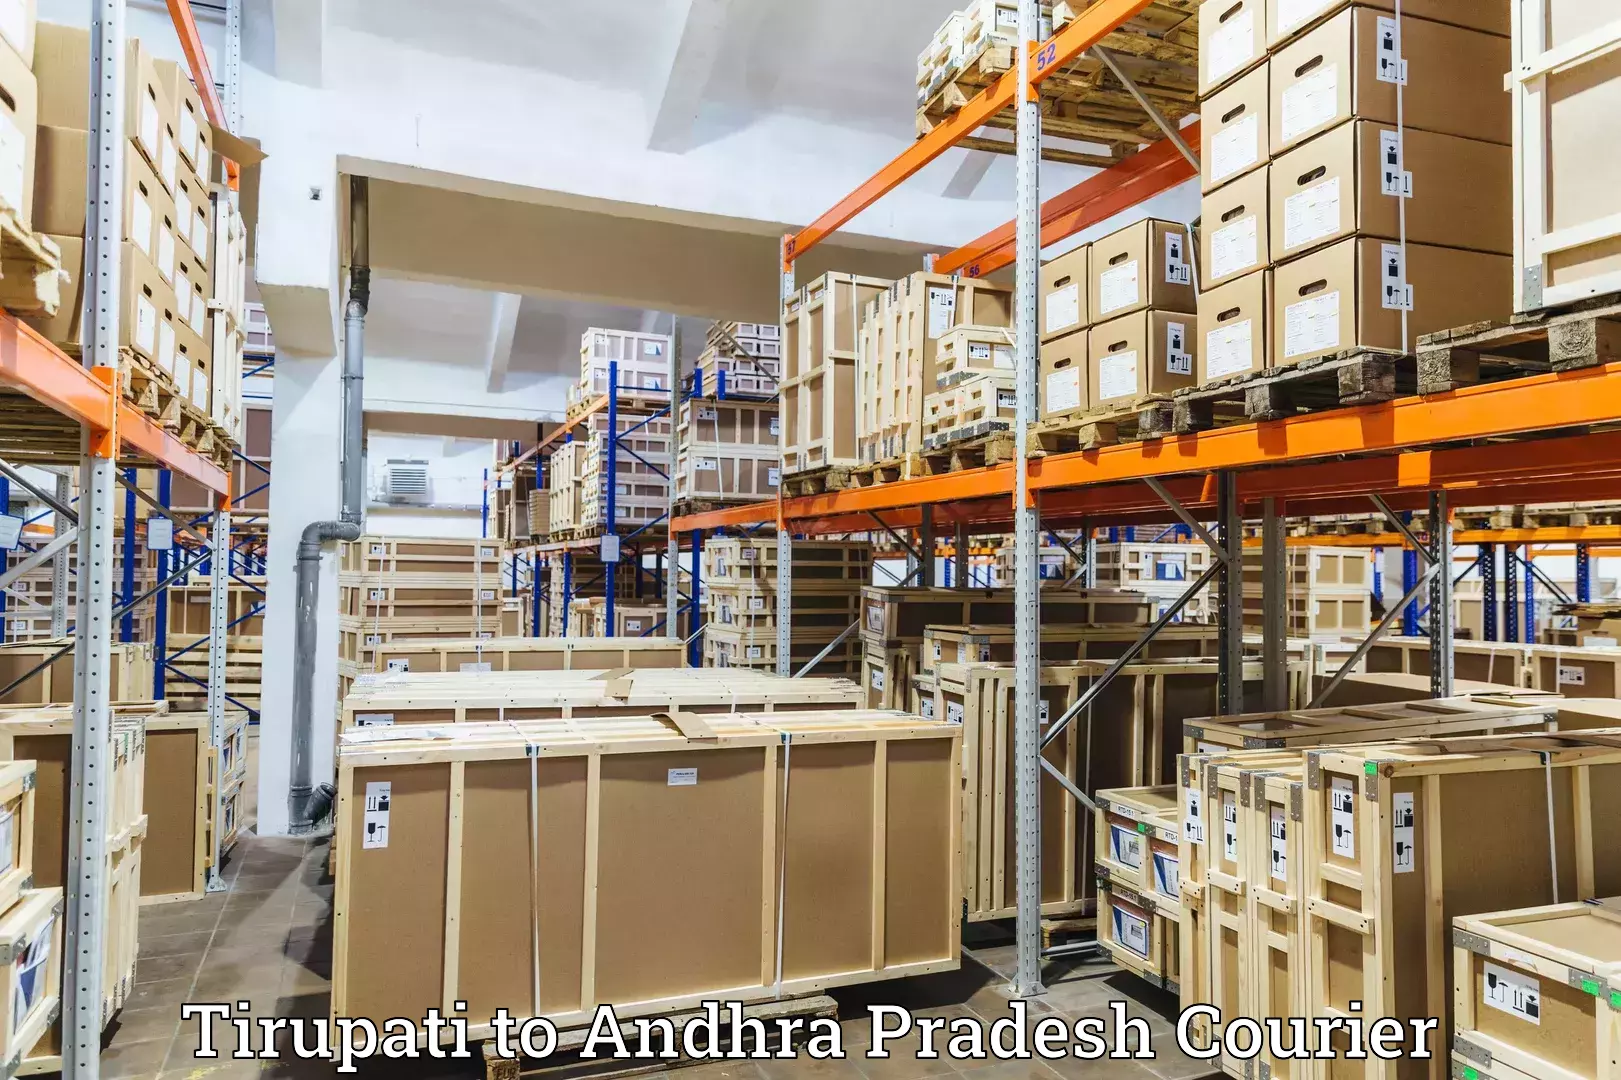 Easy access courier services in Tirupati to Visakhapatnam Port